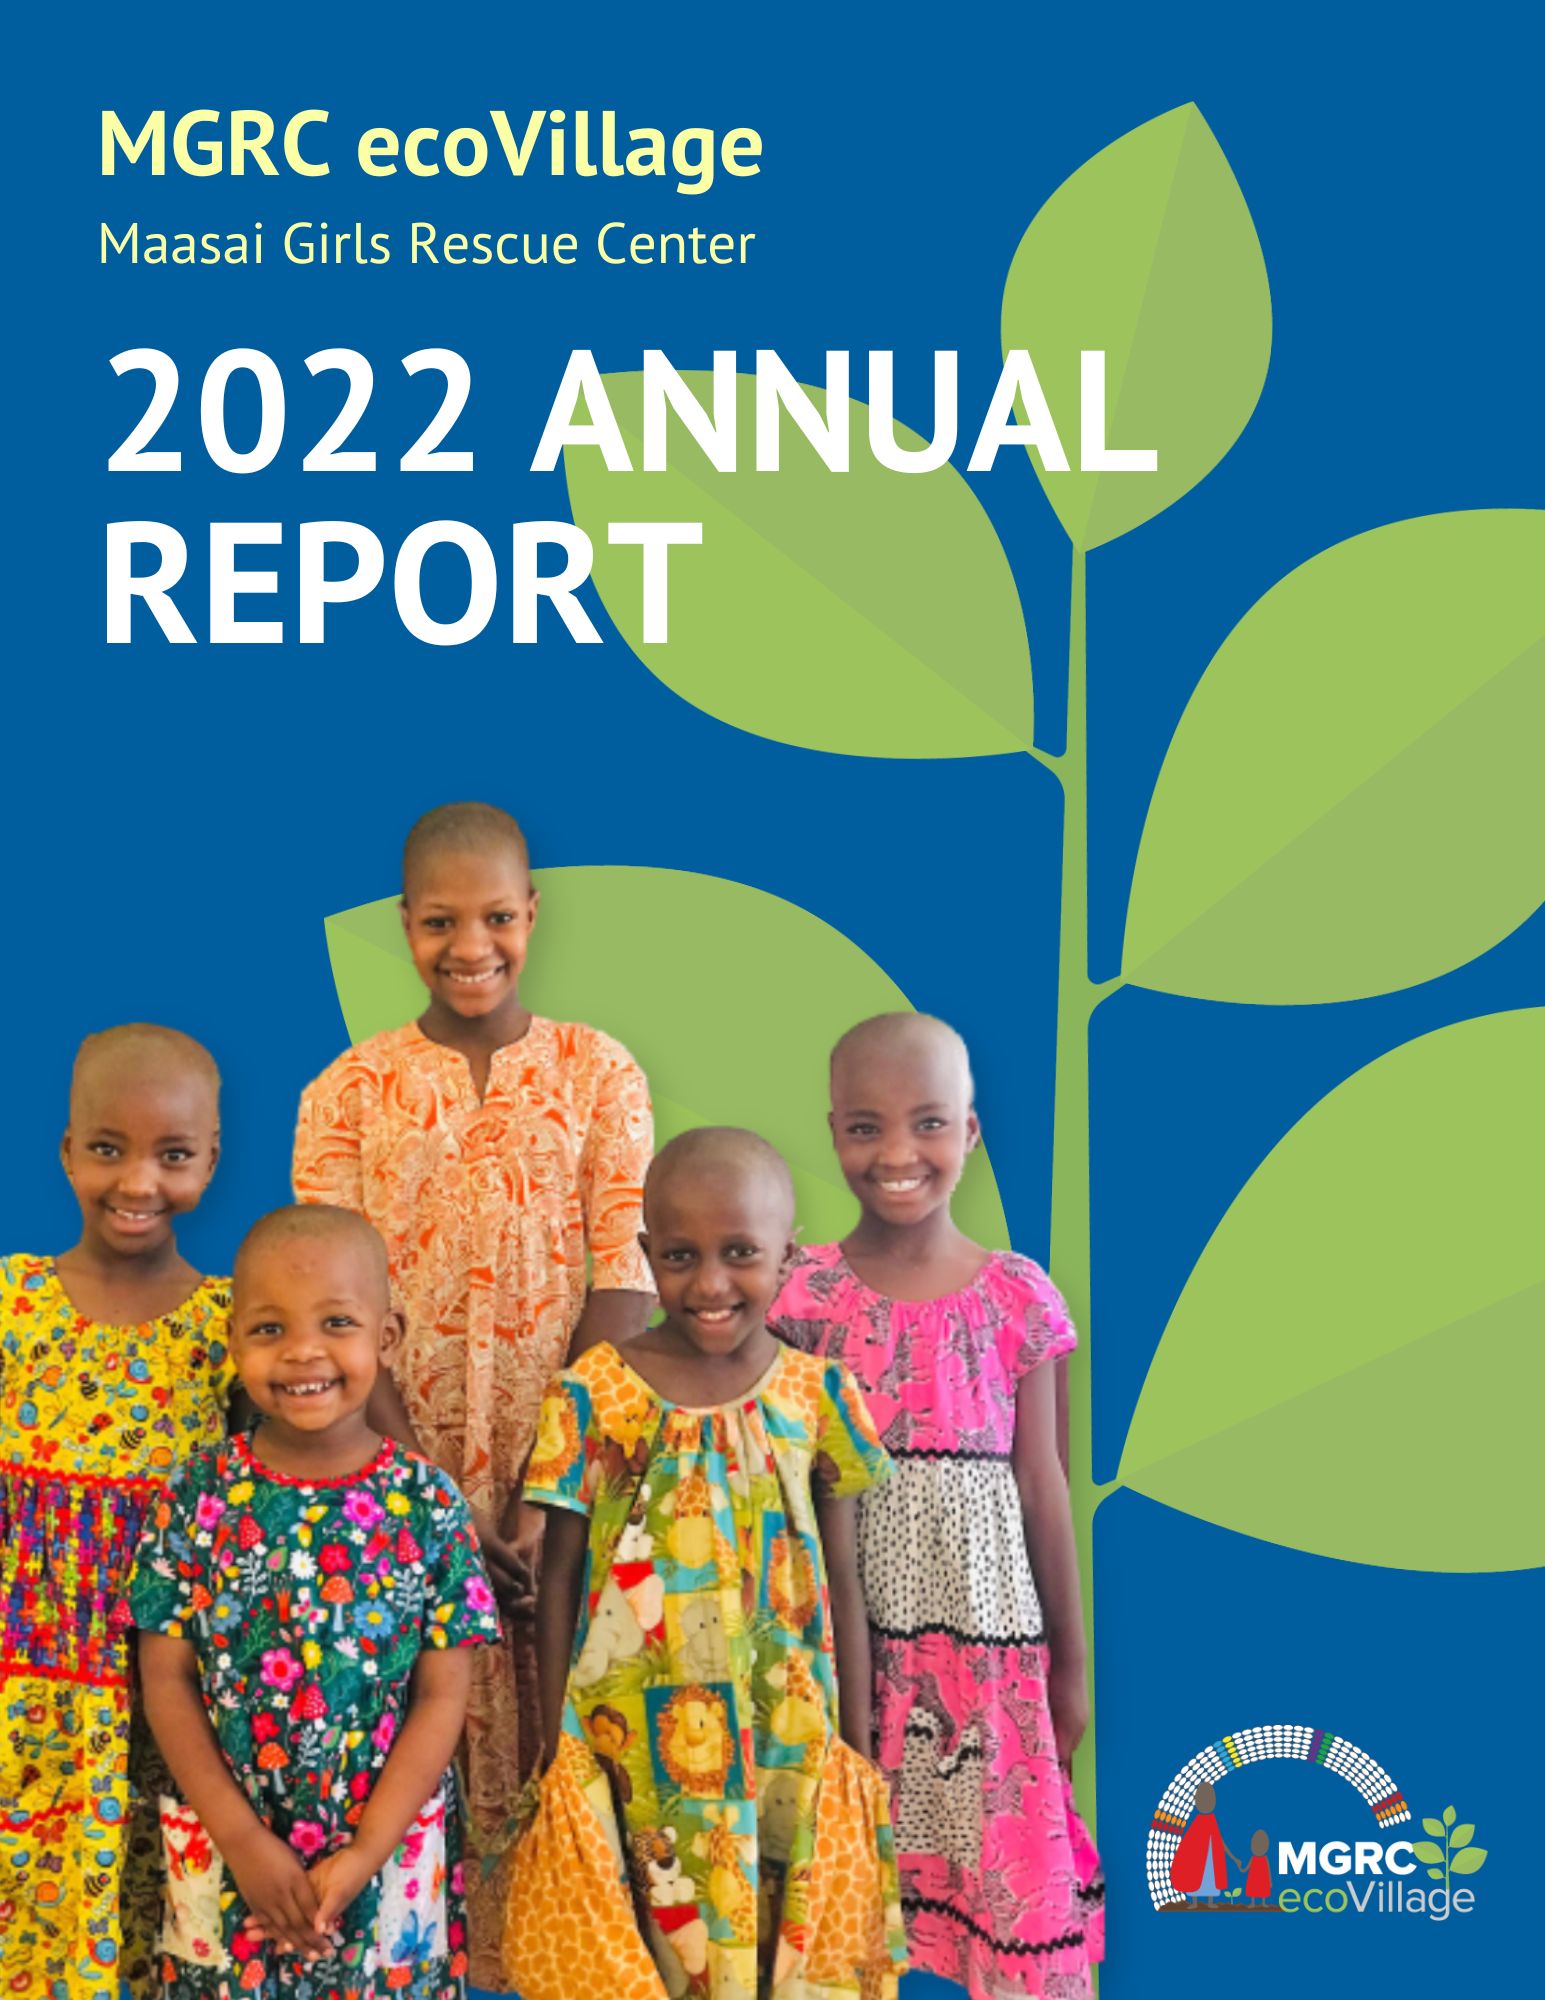 2022 annual report cover featuring five MGRC girls.